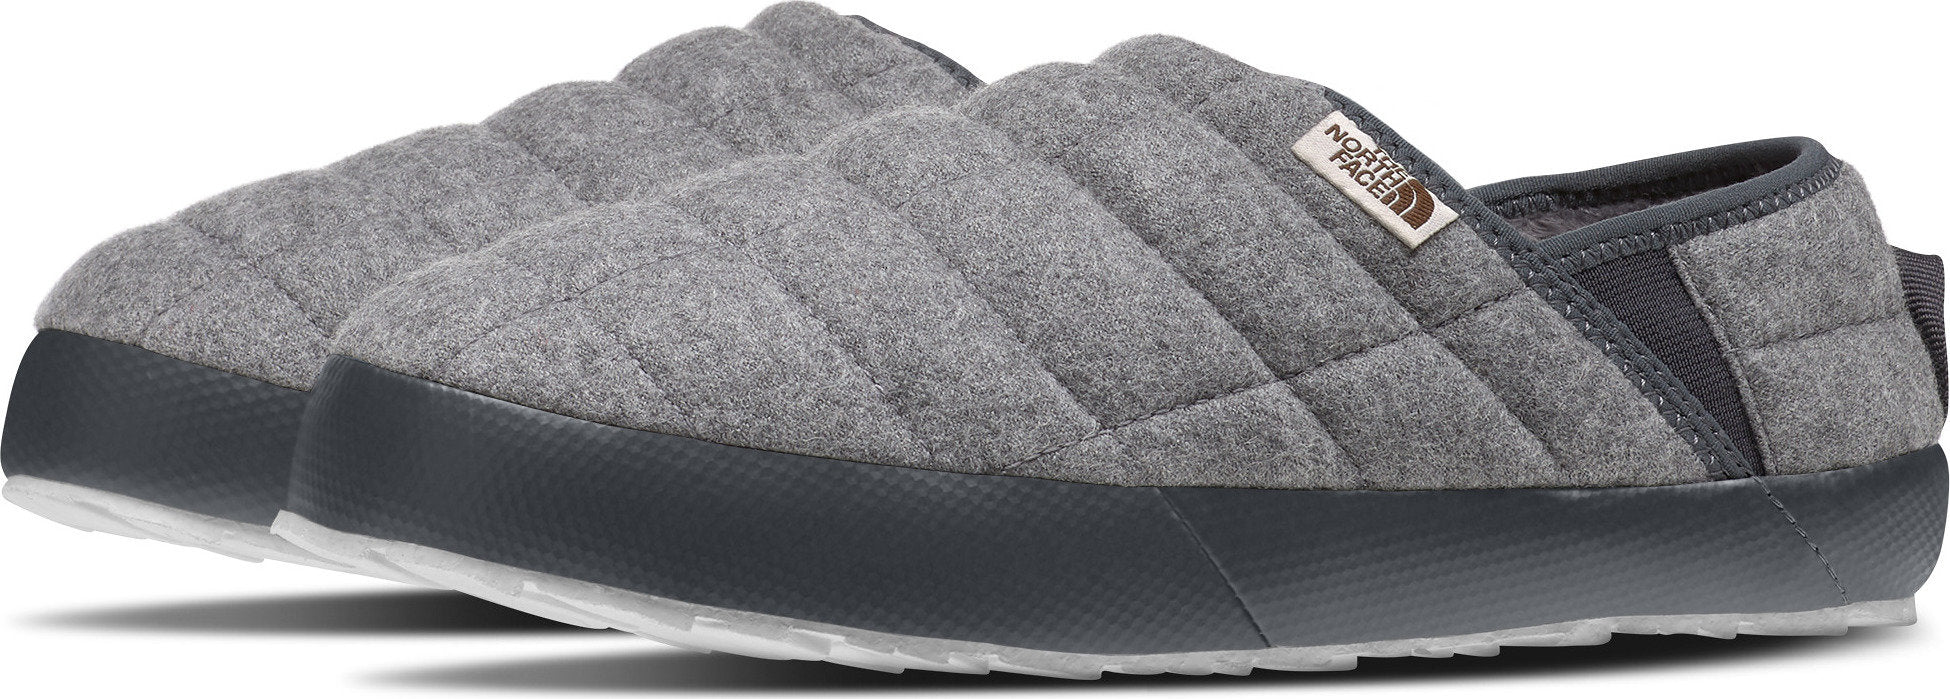 womens thermoball slippers